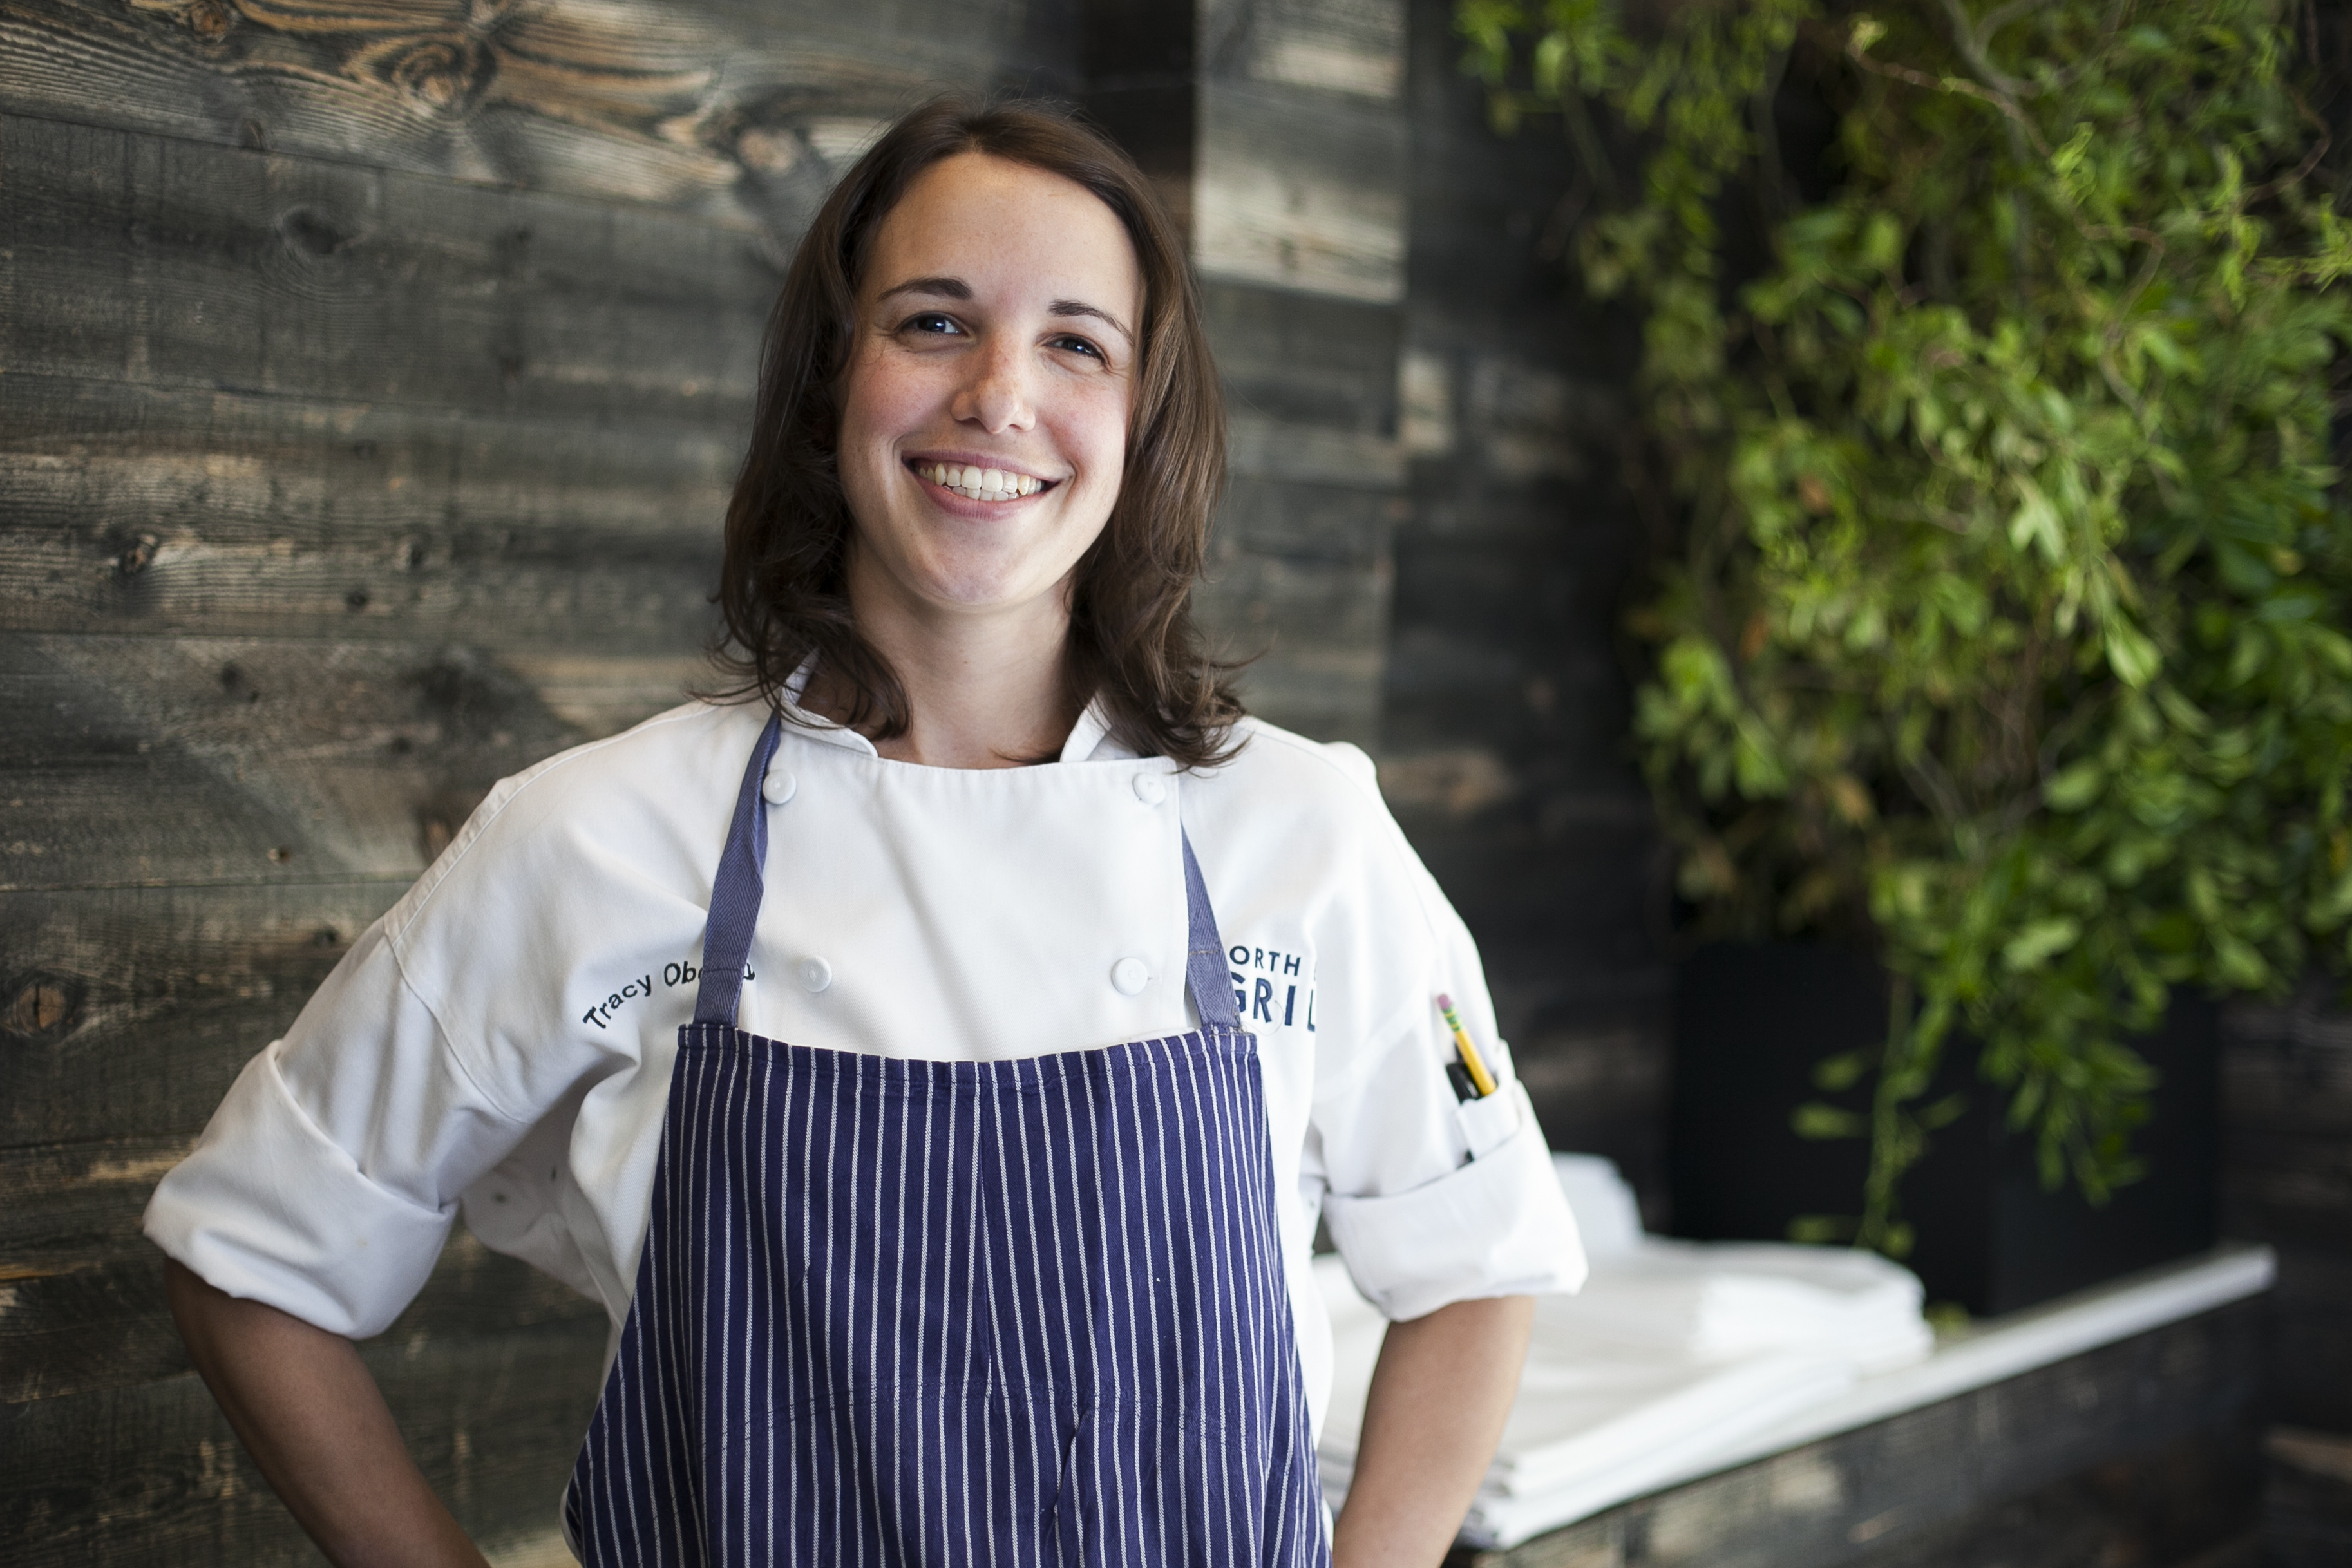 Pastry chef Tracy Obolsky at North End Grill in June 2014. (Samira Bouaou/Epoch Times)